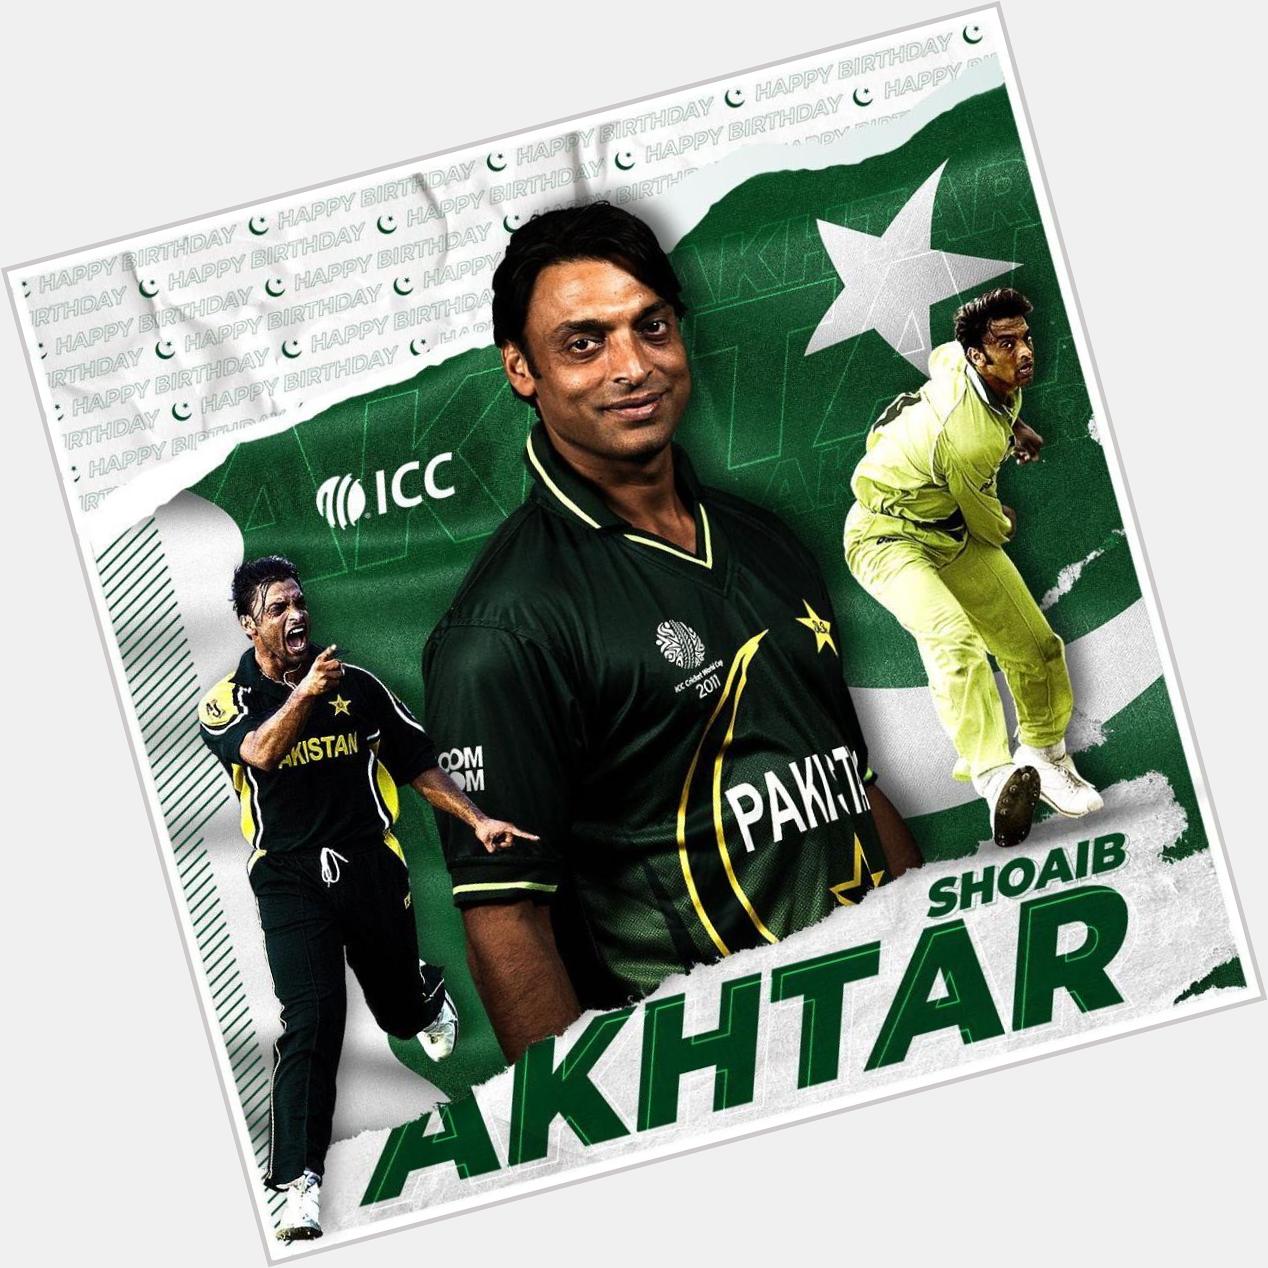   Happy birthday to one of the fastest bowlers ever, Shoaib Akhtar  